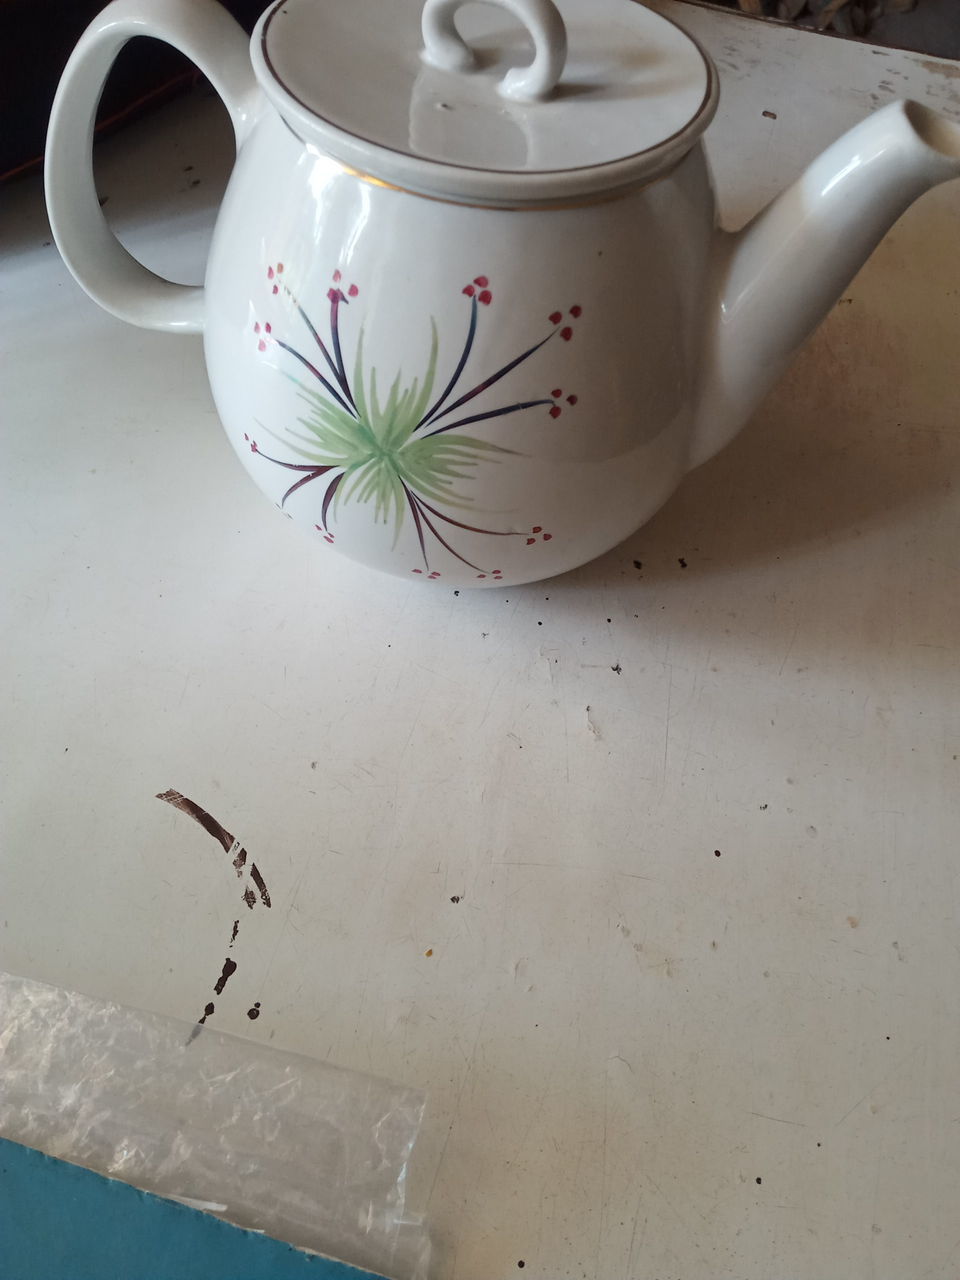 teapot, cup, ceramic, food and drink, mug, drink, tea, hot drink, saucer, indoors, no people, tea cup, coffee cup, refreshment, art, still life, food, table, tableware, serveware, crockery, nature, high angle view, wellbeing, plant